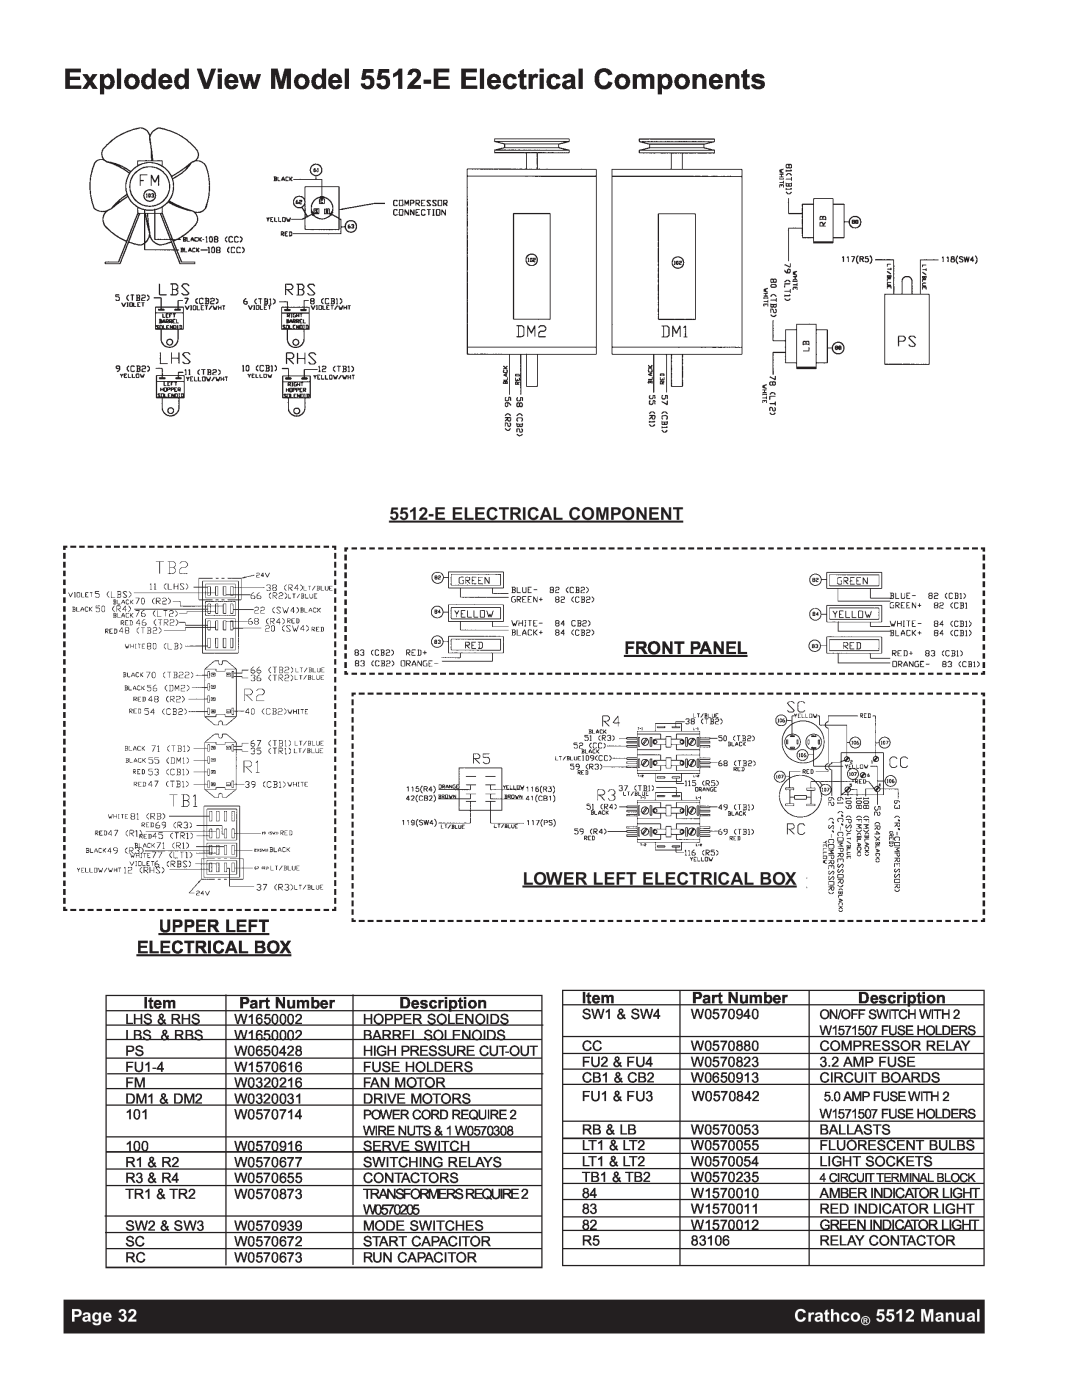 Grindmaster 5512E Exploded View Model 5512-E Electrical Components, Upper Left Electrical Box, Page, Crathco 5512 Manual 